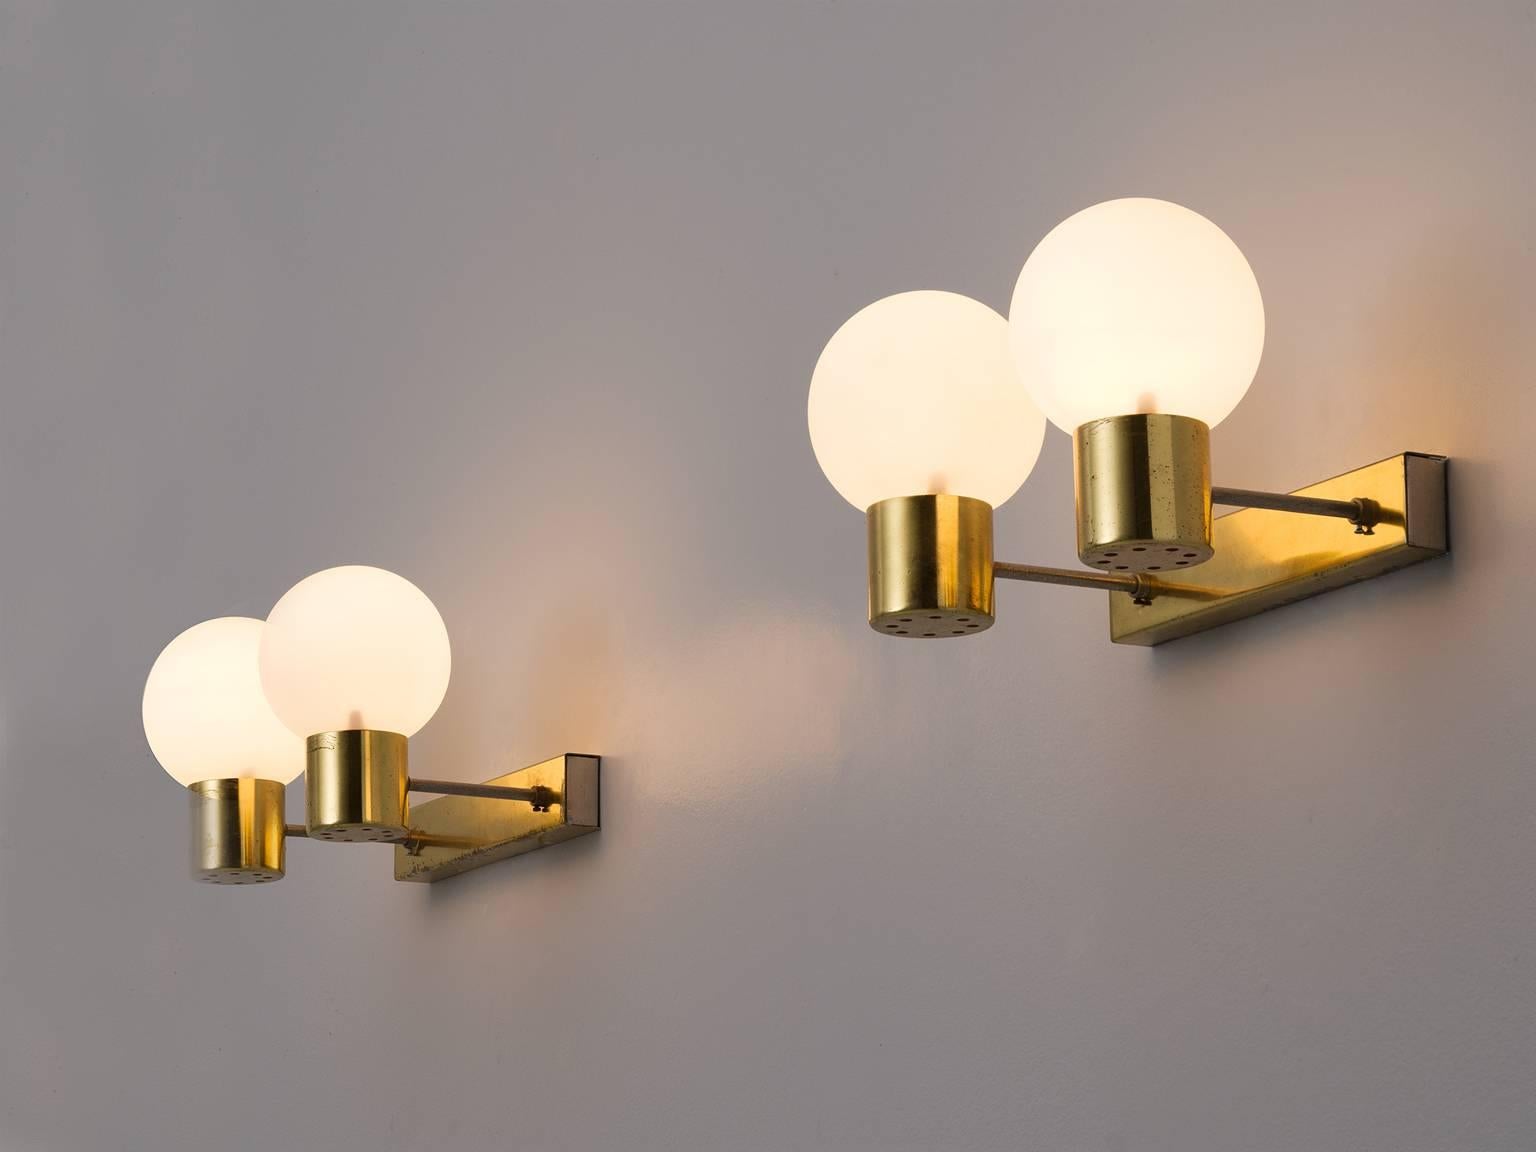 Wall lights, brass and opaline glass, Europe, 1960s. 

Wonderful set of solid brass frames with opaline glass shades with a matte white finish. These wall scones have a very natural light partition and elegant shaped glass. They are the perfect